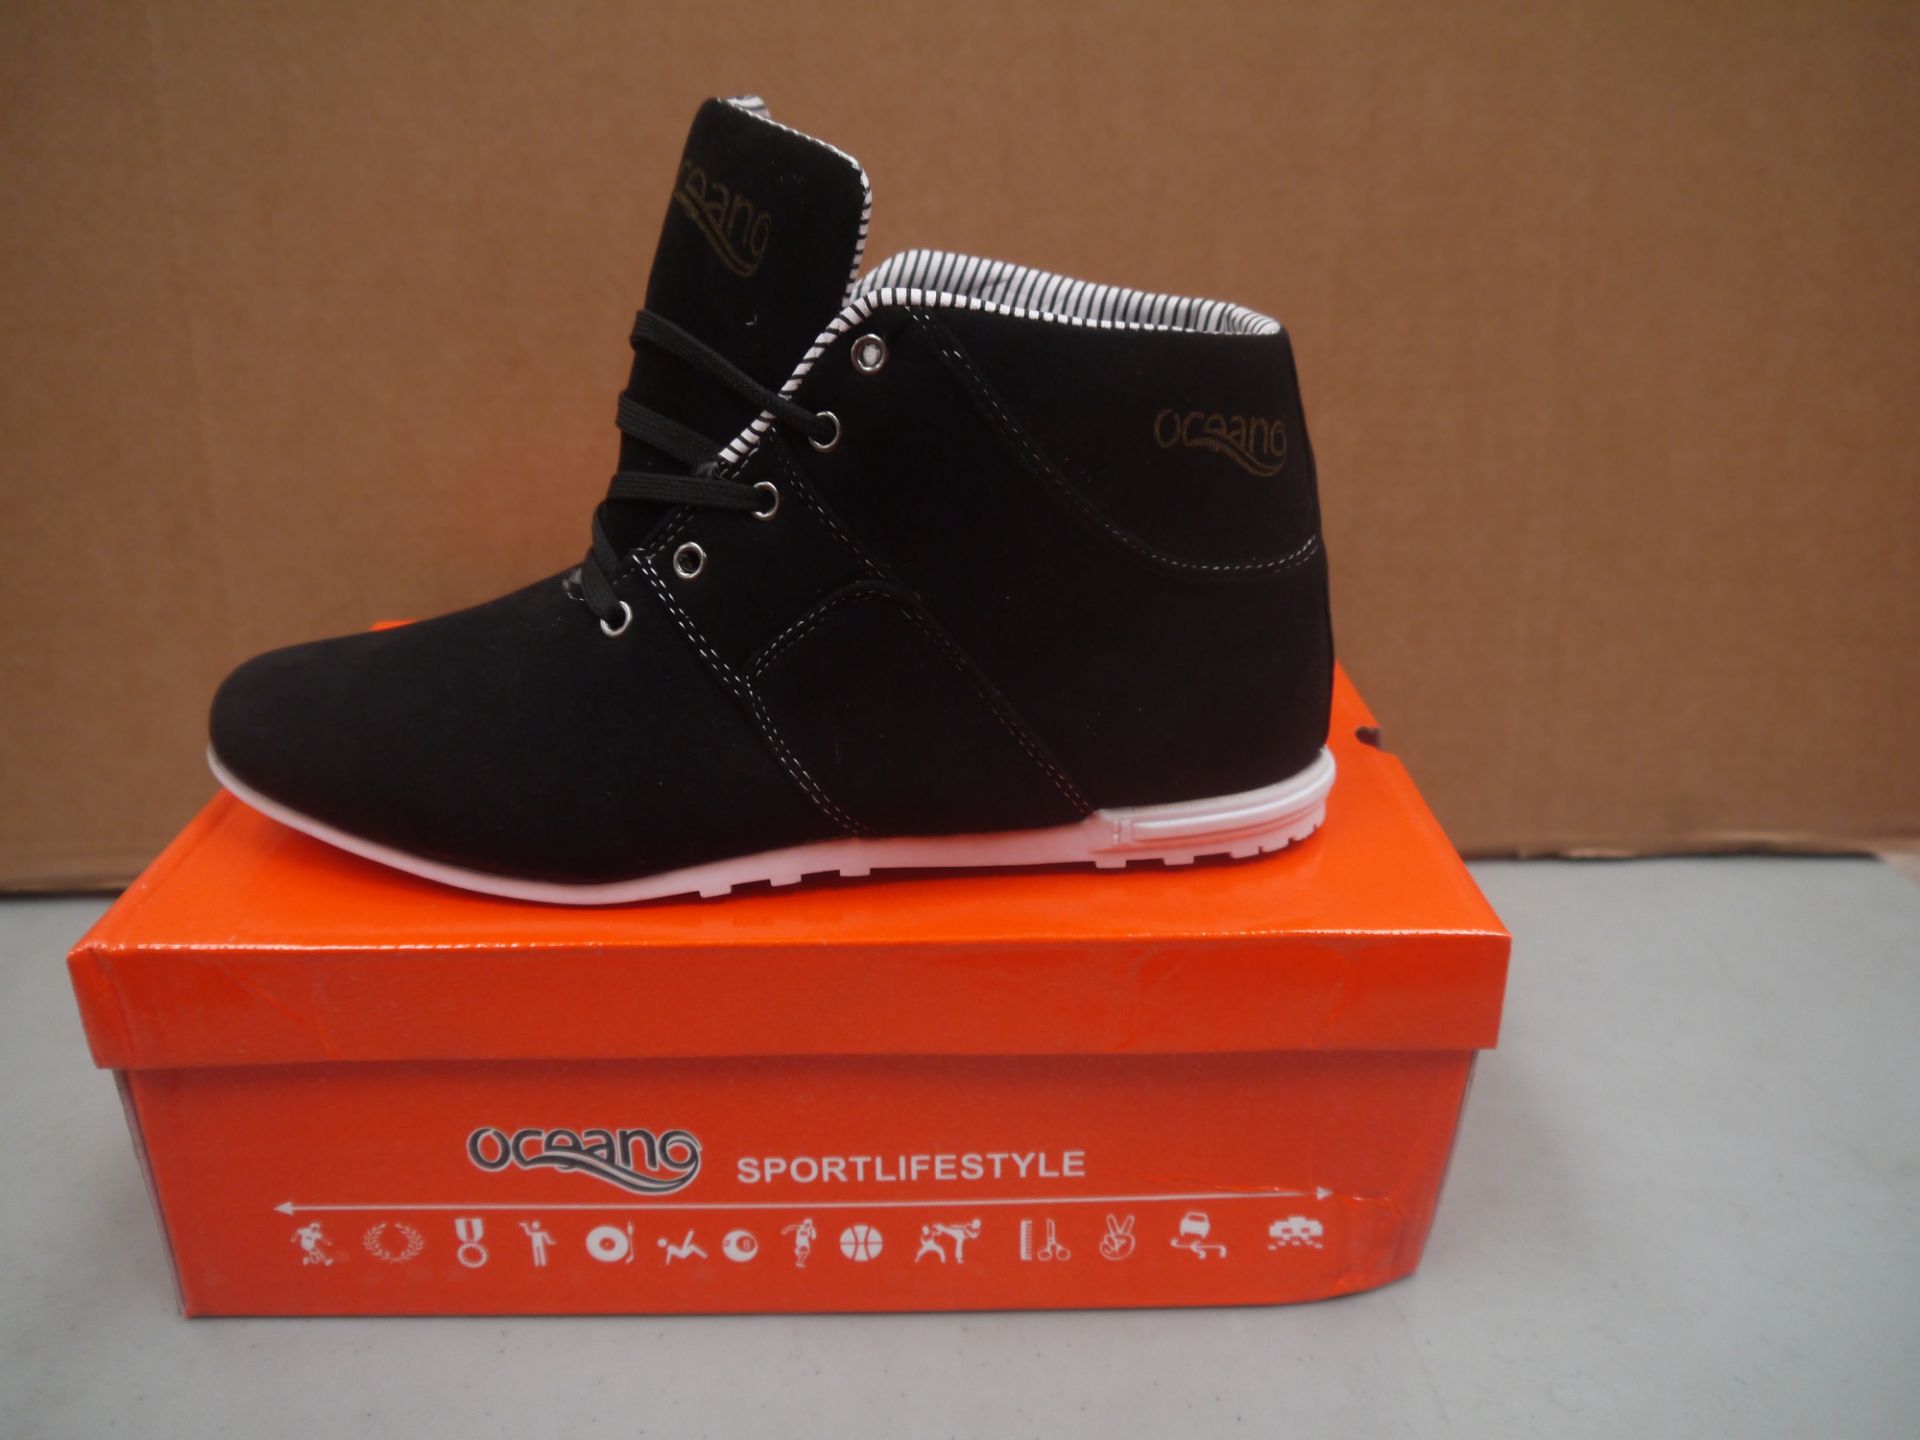 Mens Black Suede Oceano trainer style boot new and boxed size UK10